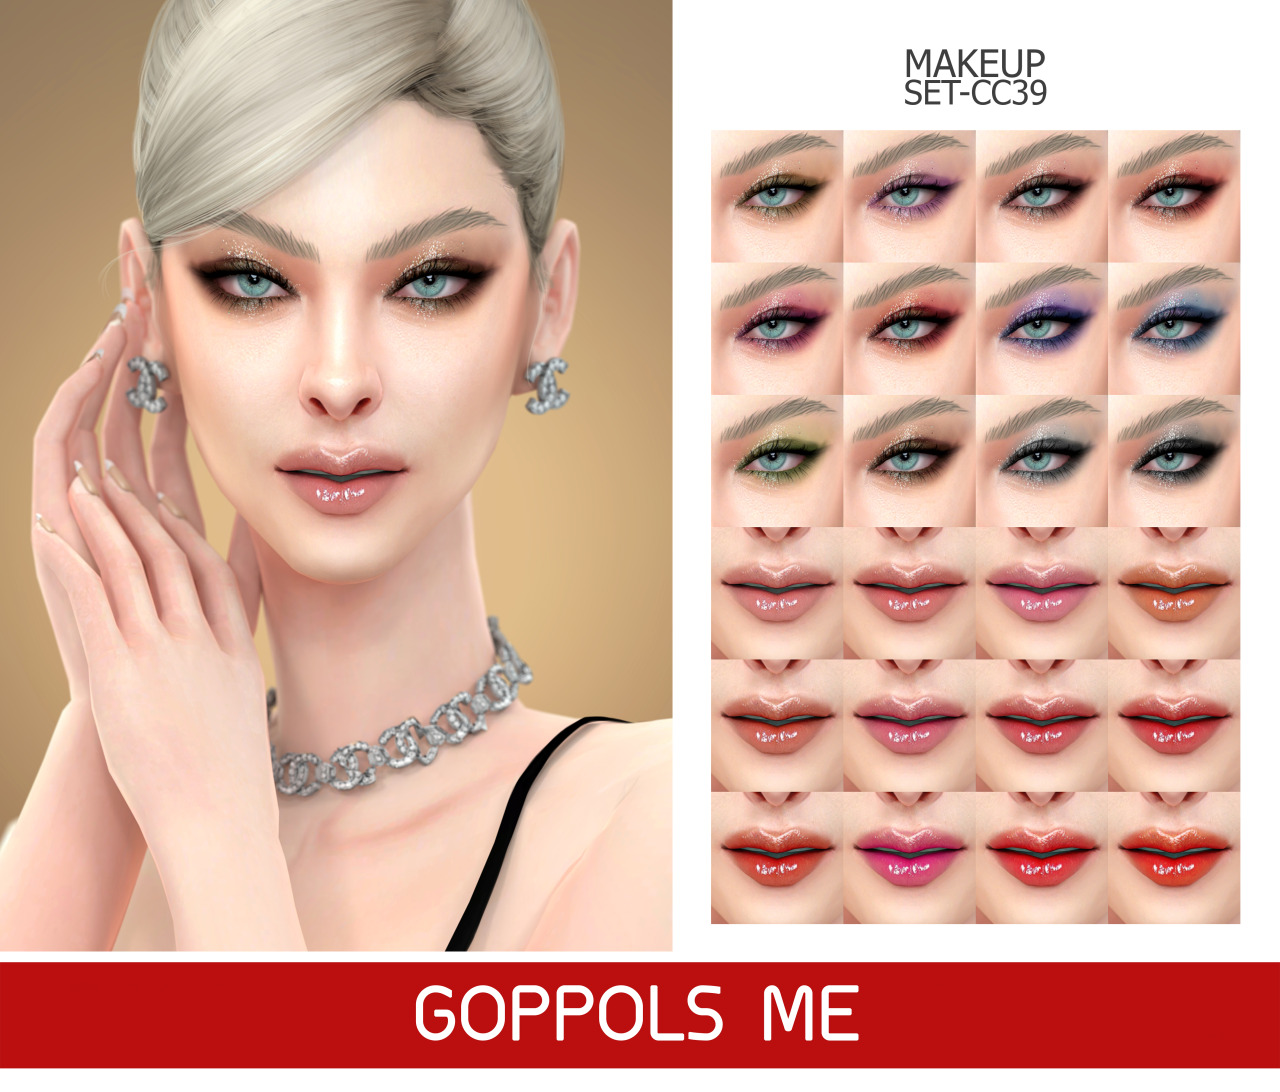 GPME-GOLD MAKEUP SET CC39DownloadHQ mod compatibleAccess to Exclusive GOPPOLSME Patreon onlyThank for support me  ❤  Thanks for all CC creators ❤Hope you like it .Please don’t re-upload #goppolsme#thesims4#sims4cc#sims4ccfinds#sims4makeup#s4cc#s4ccfinds#s4makeup